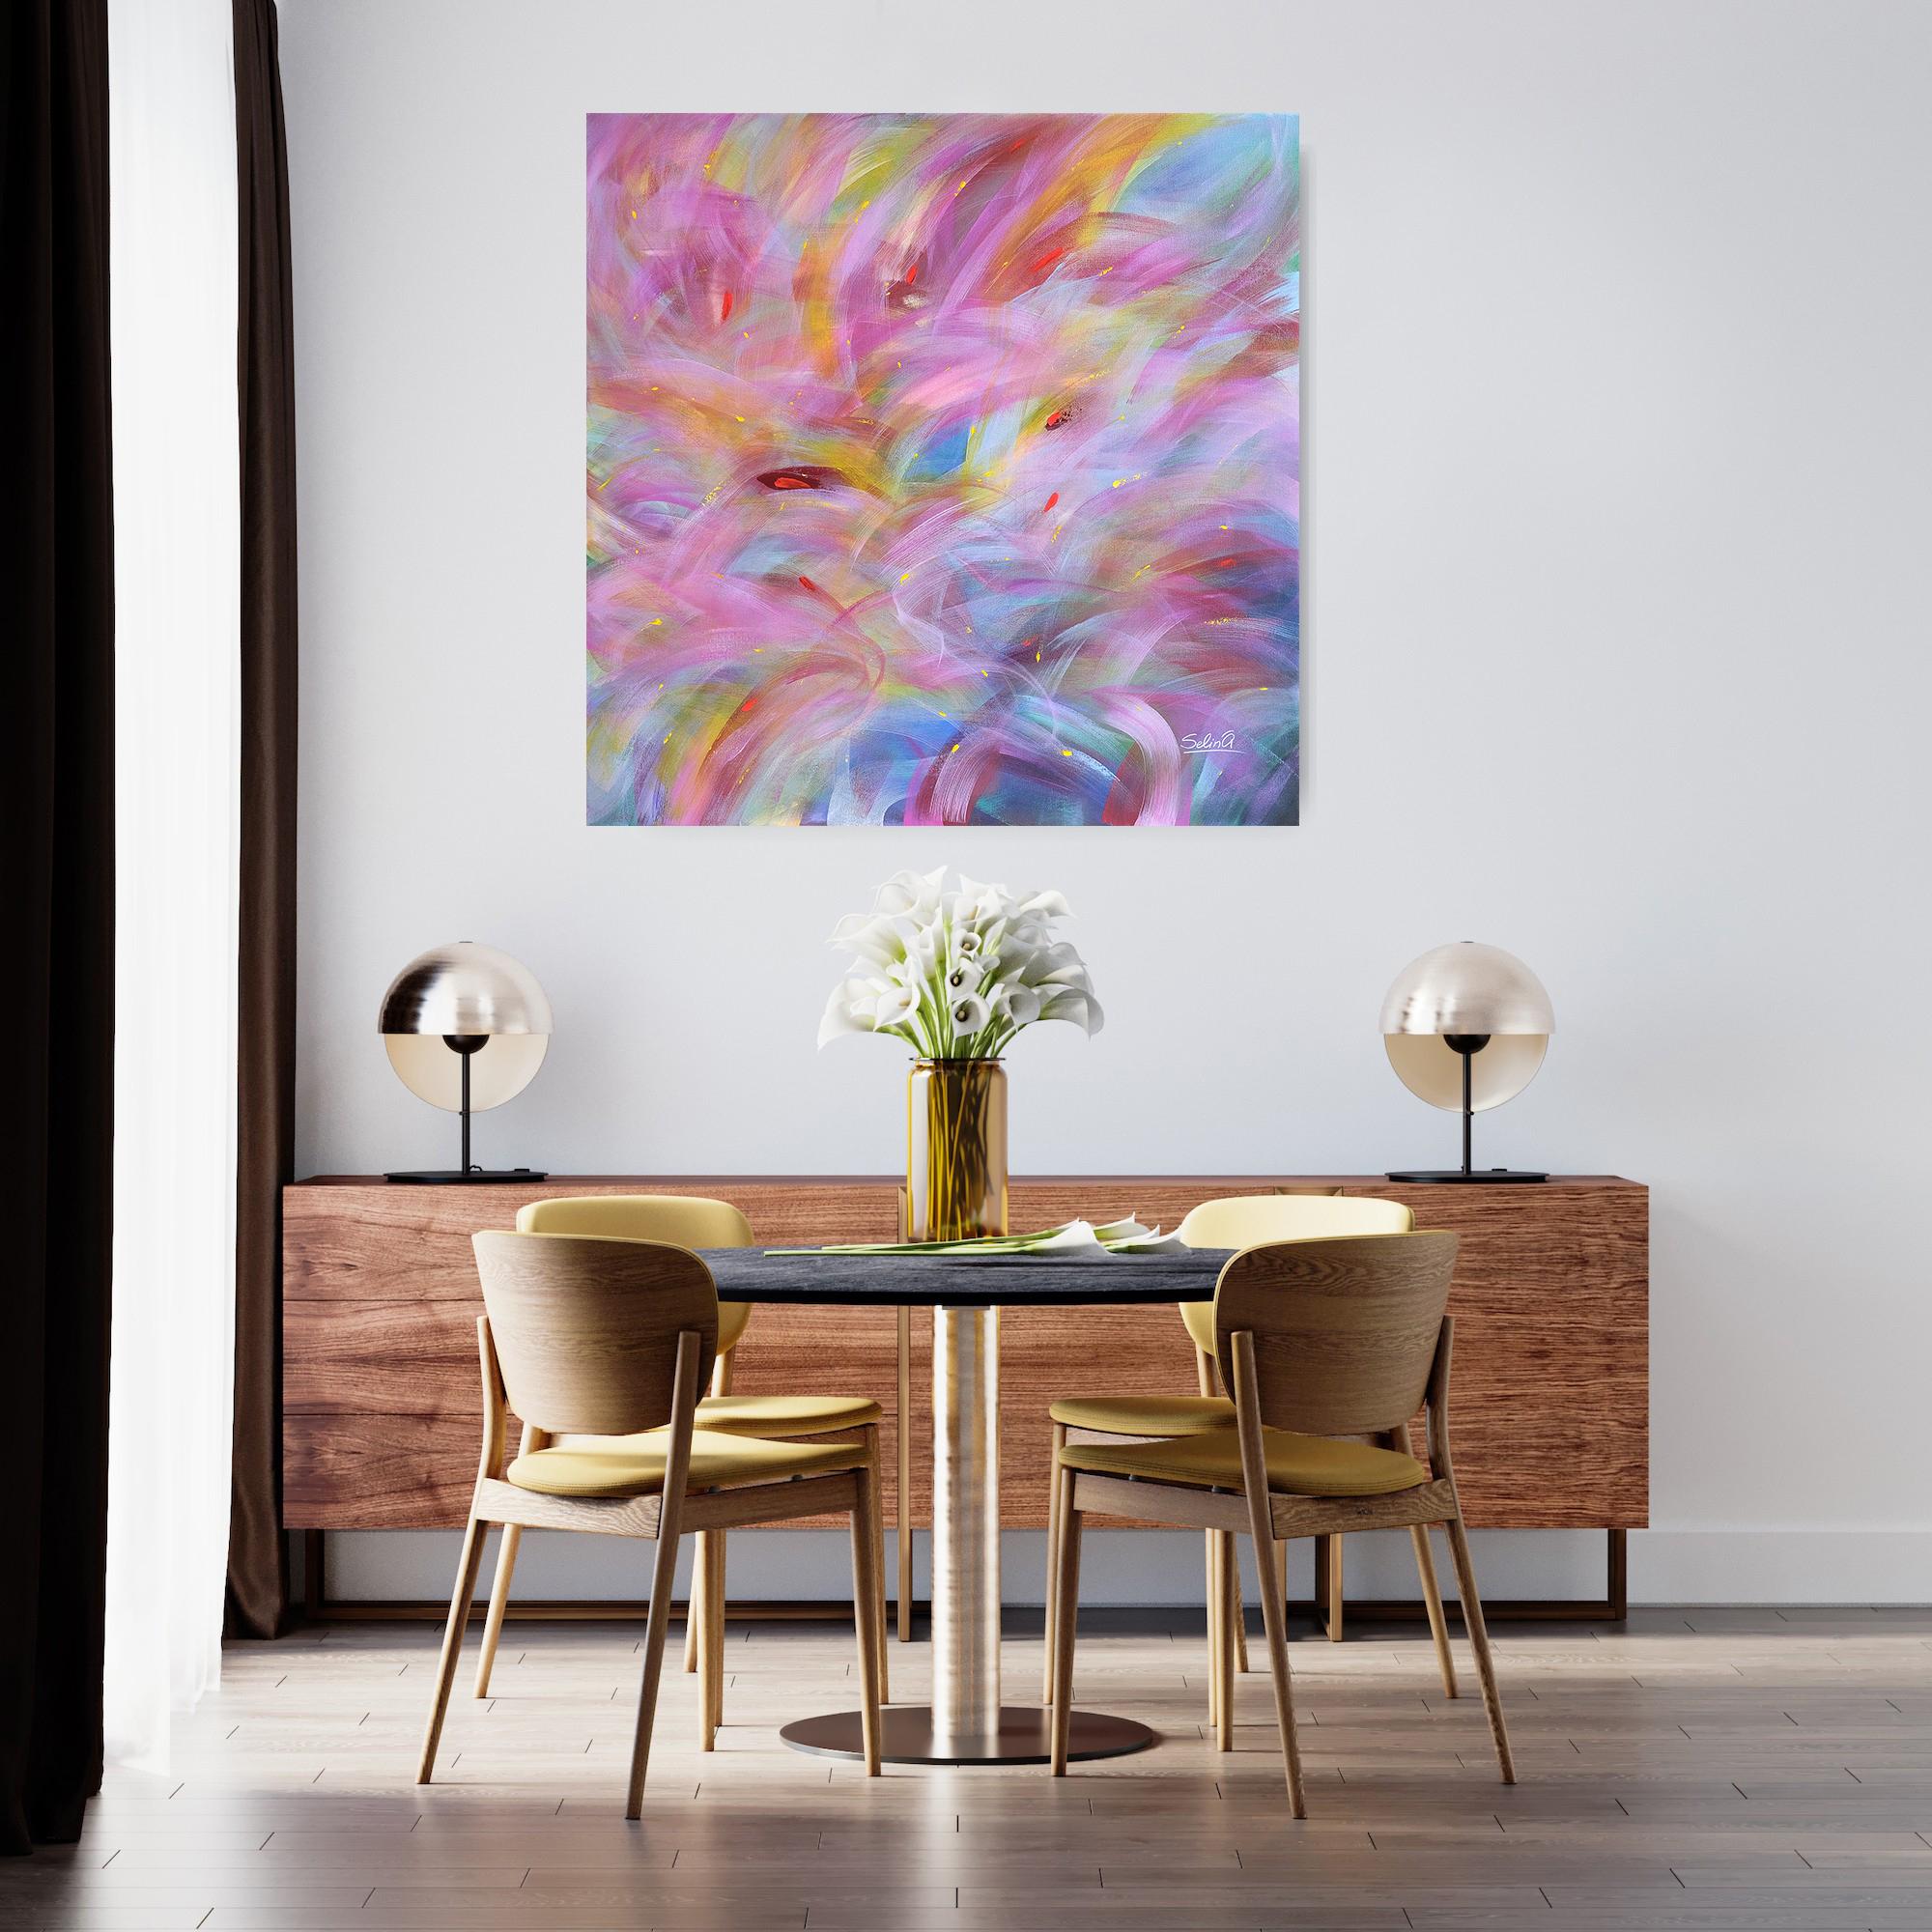 Morning light, Modern Colorful Abstract Painting 100x100cm by Anna Selina For Sale 1